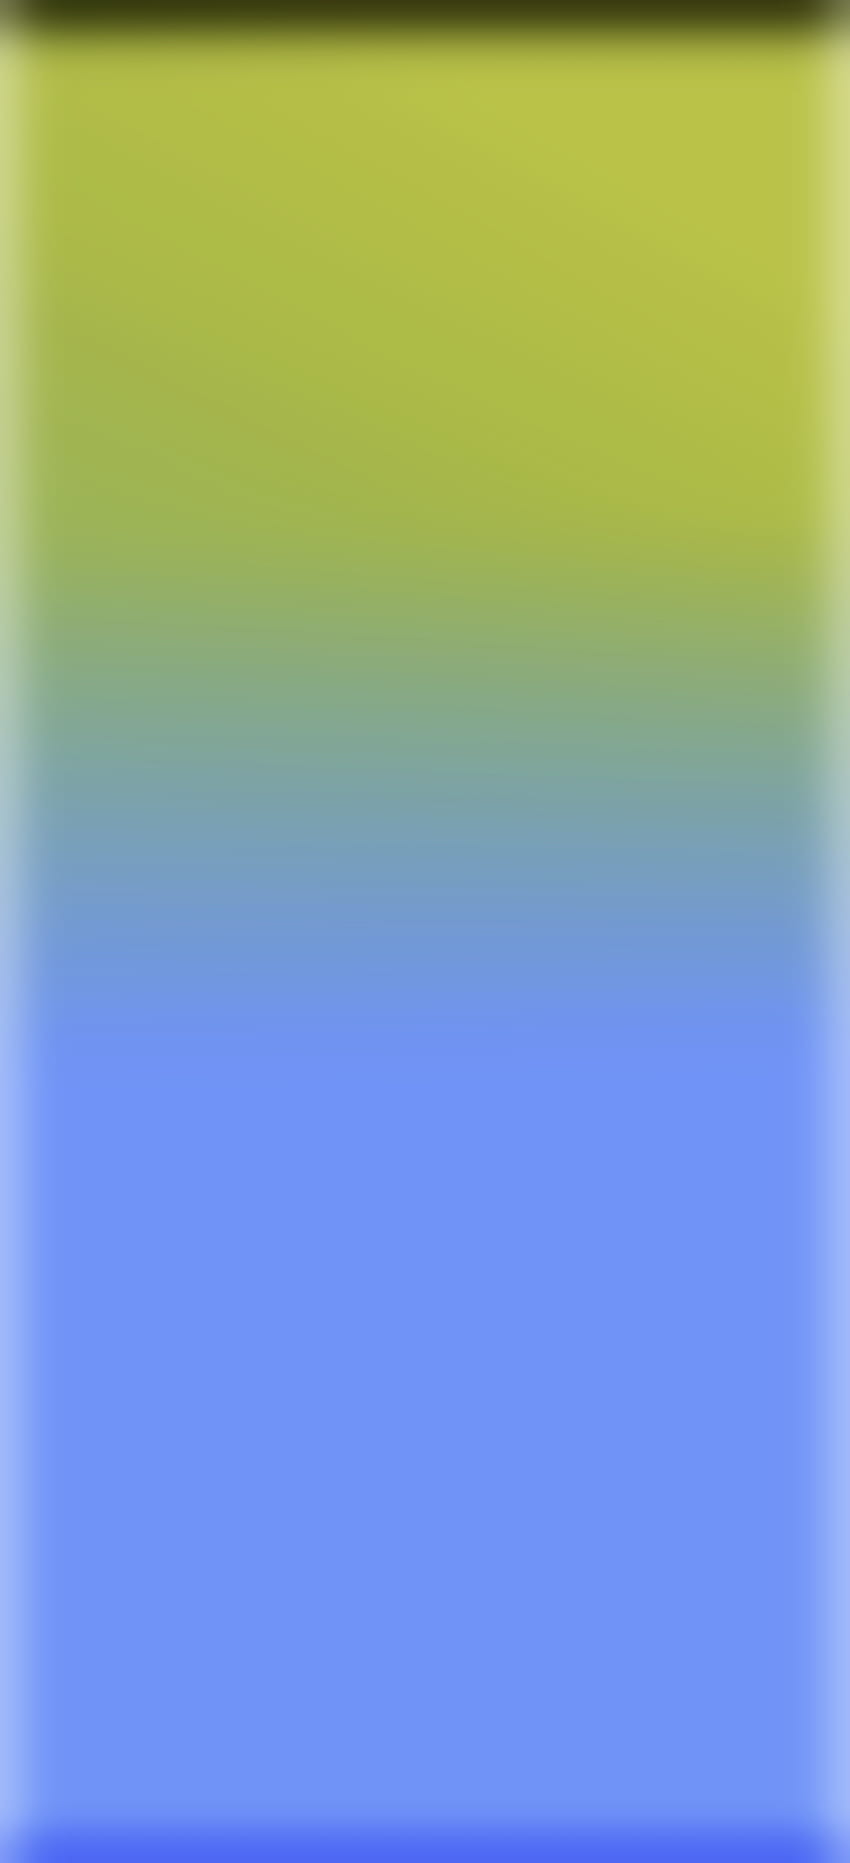 Classic Gradient 2021, iPhone, New, Samsung Galaxy, Cool, Color Art, Modern, Simple, Design, Lights, Colours, Vintage Style, Google, Pogo, Druffix, Magma, Android, Fantastic, Acer, iPhone13, Neo, LG, Edge , Nokia HD тапет за телефон